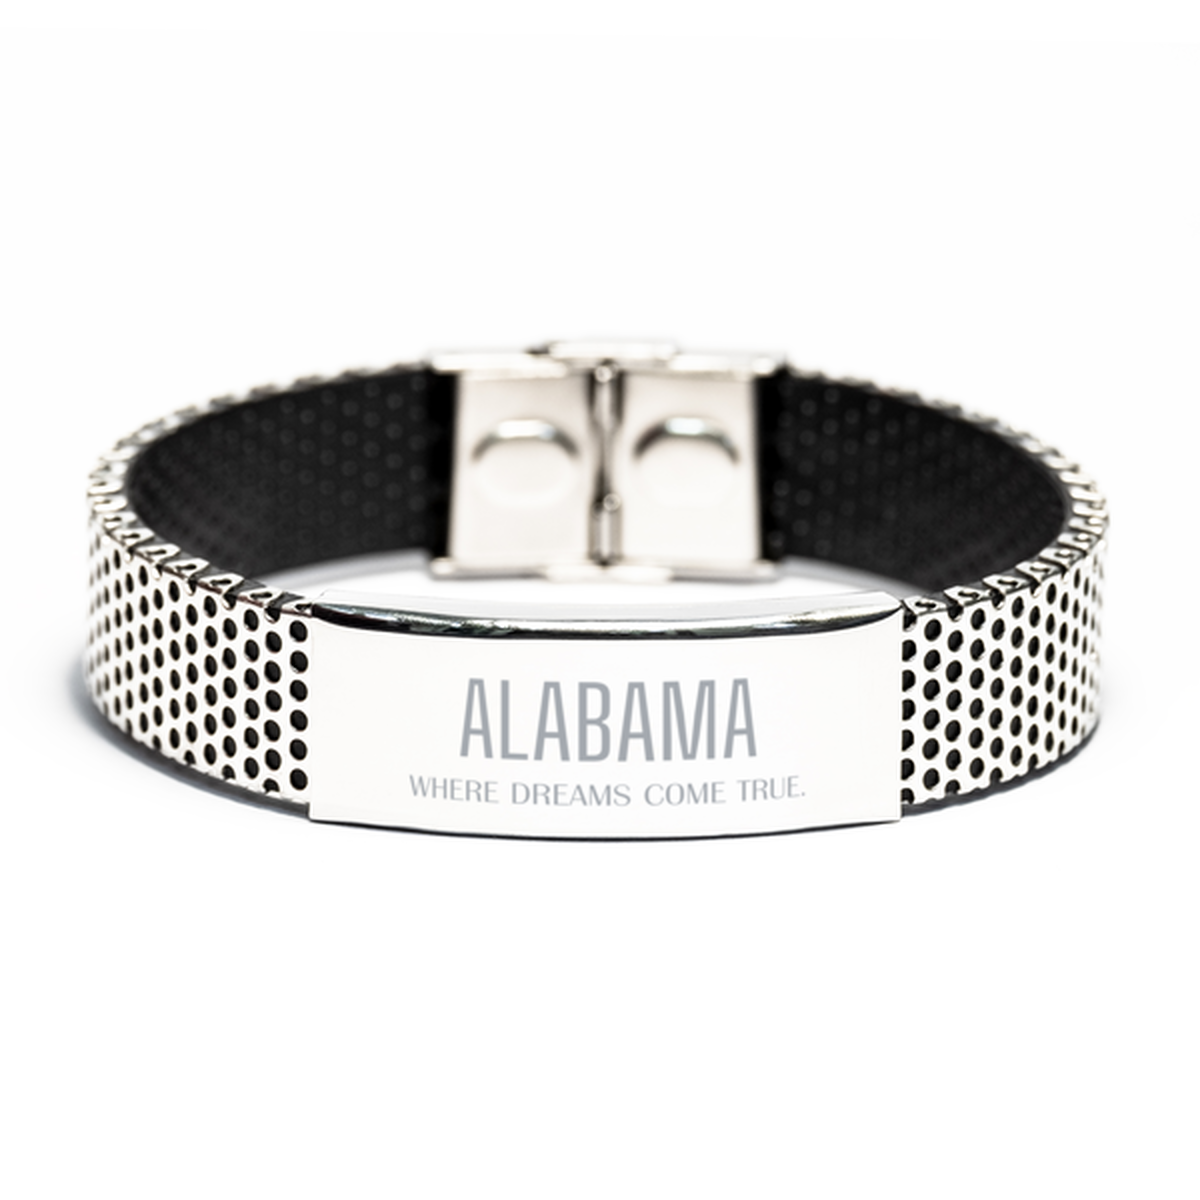 Love Alabama State Stainless Steel Bracelet, Alabama Where dreams come true, Birthday Inspirational Gifts For Alabama Men, Women, Friends